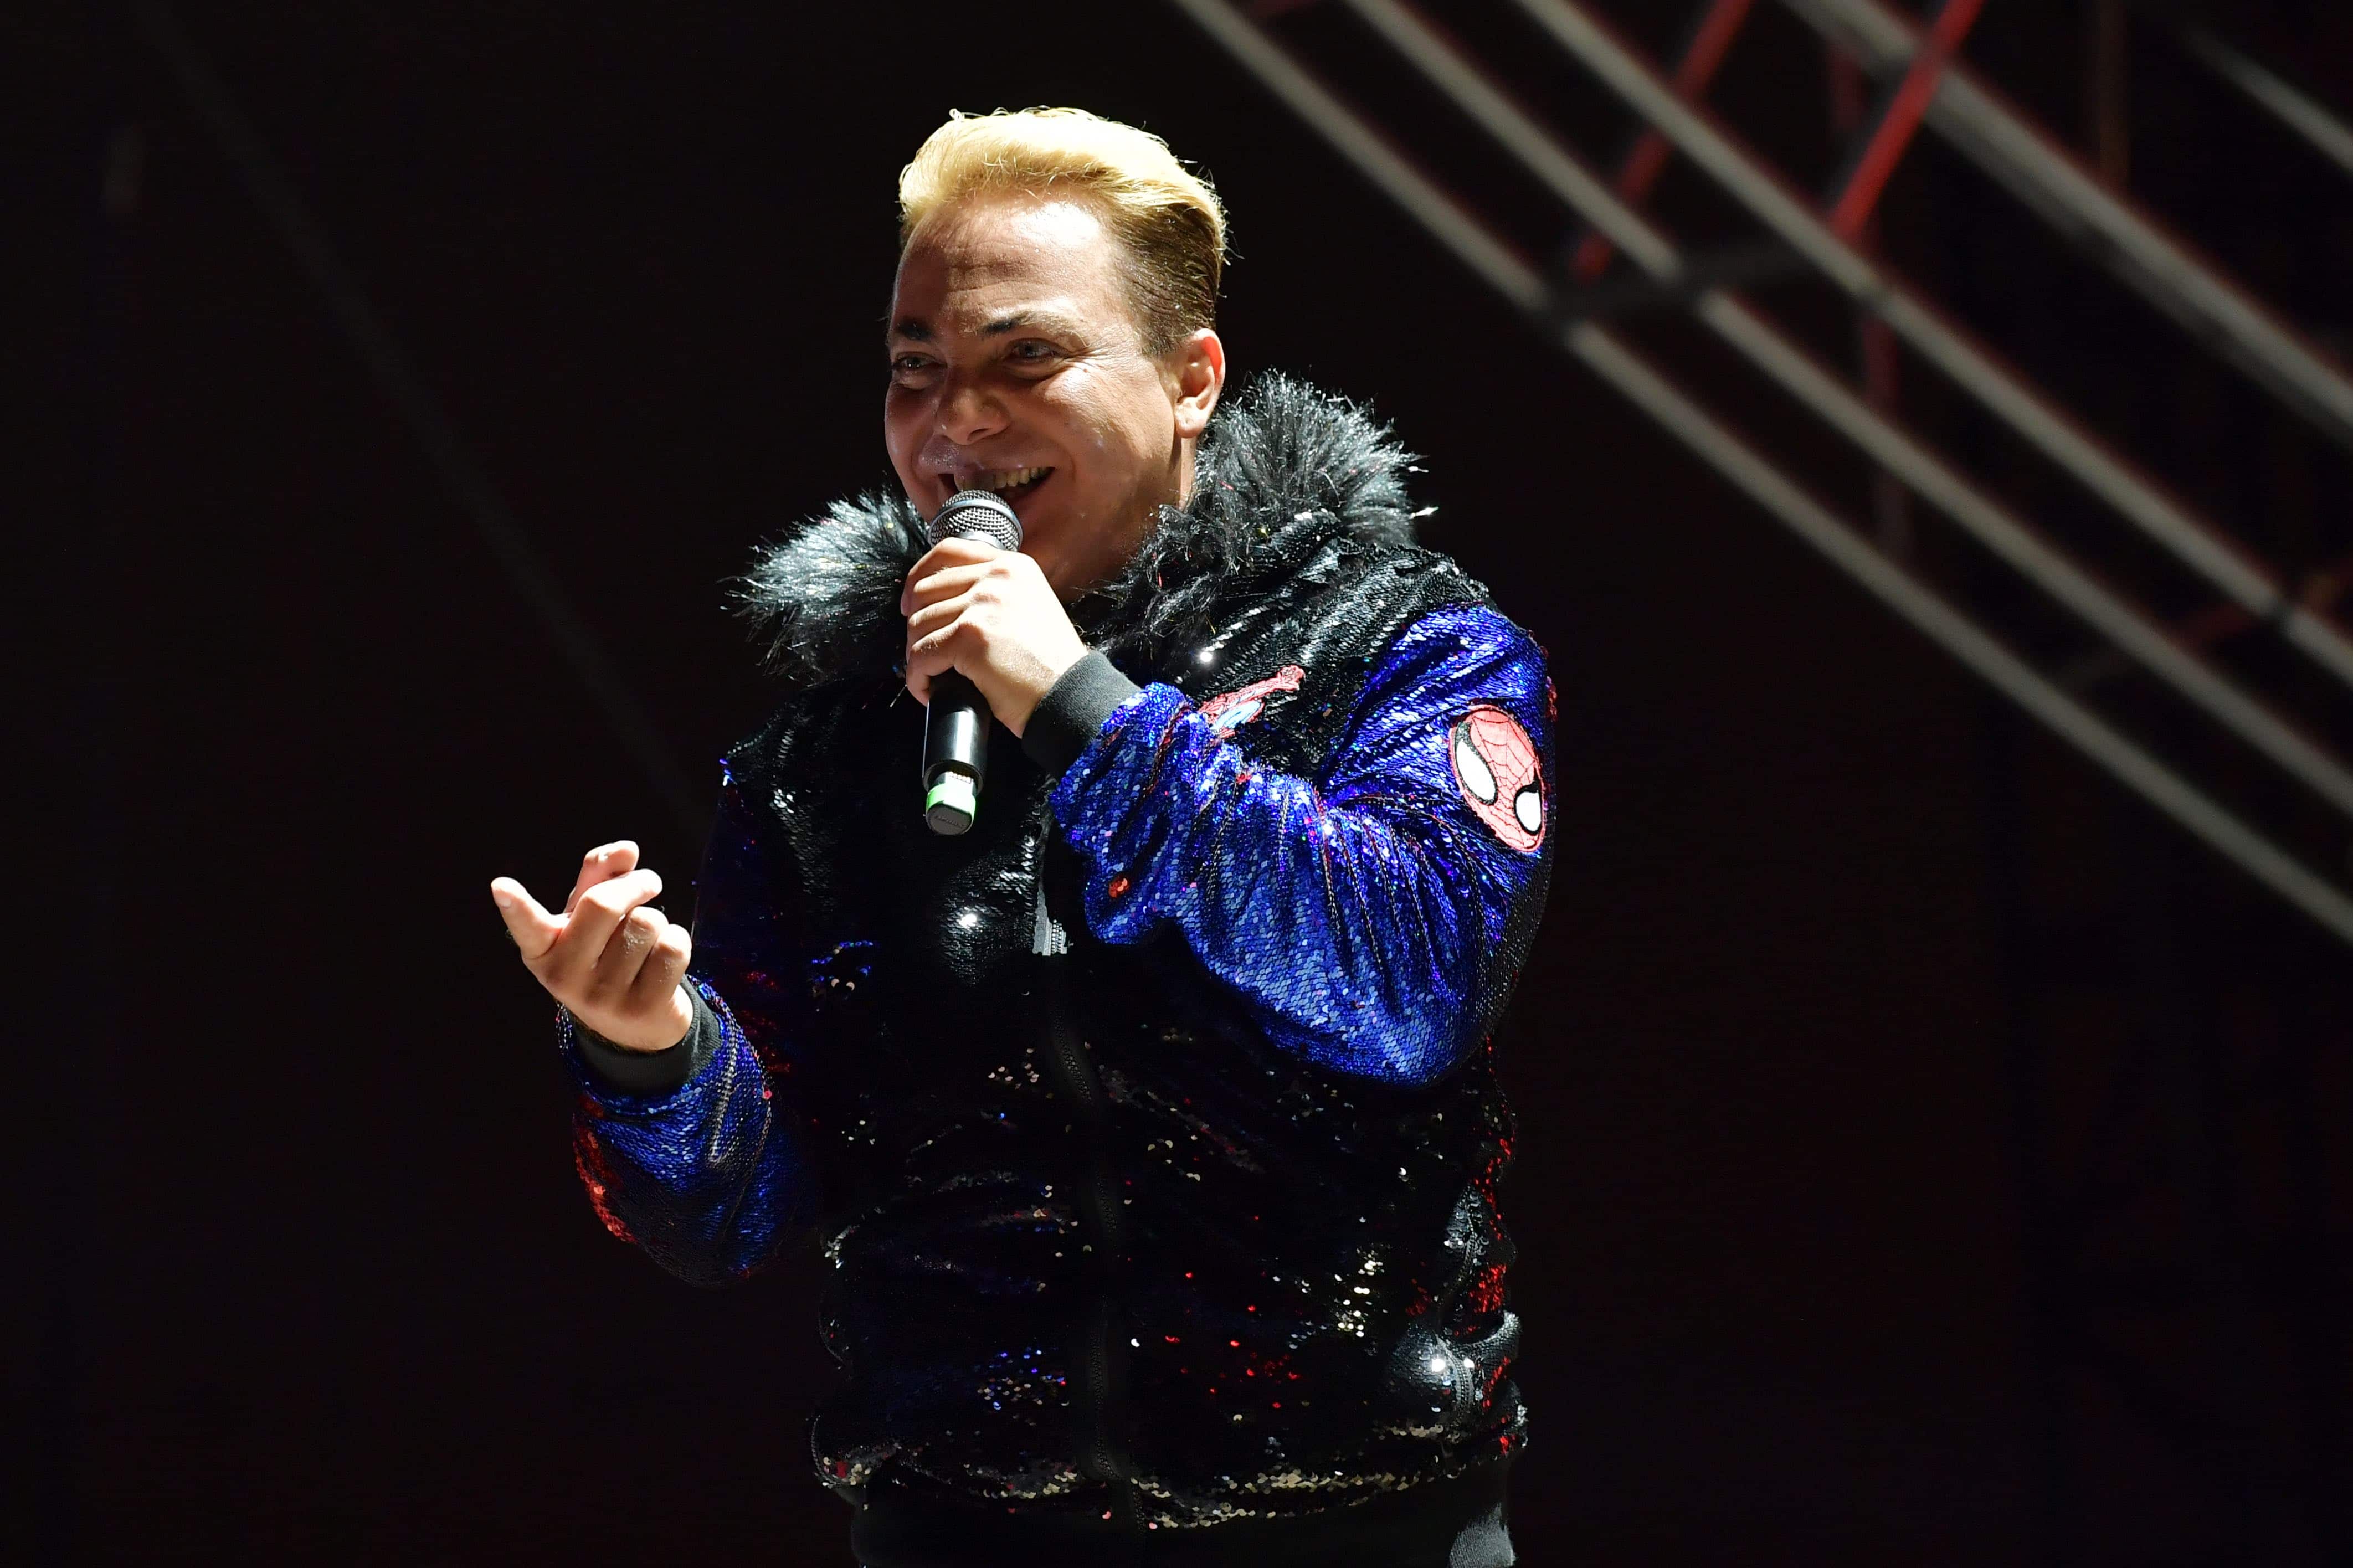 Cristian Castro Attends BTS Concert & Confirms He’s a Member of ARMY